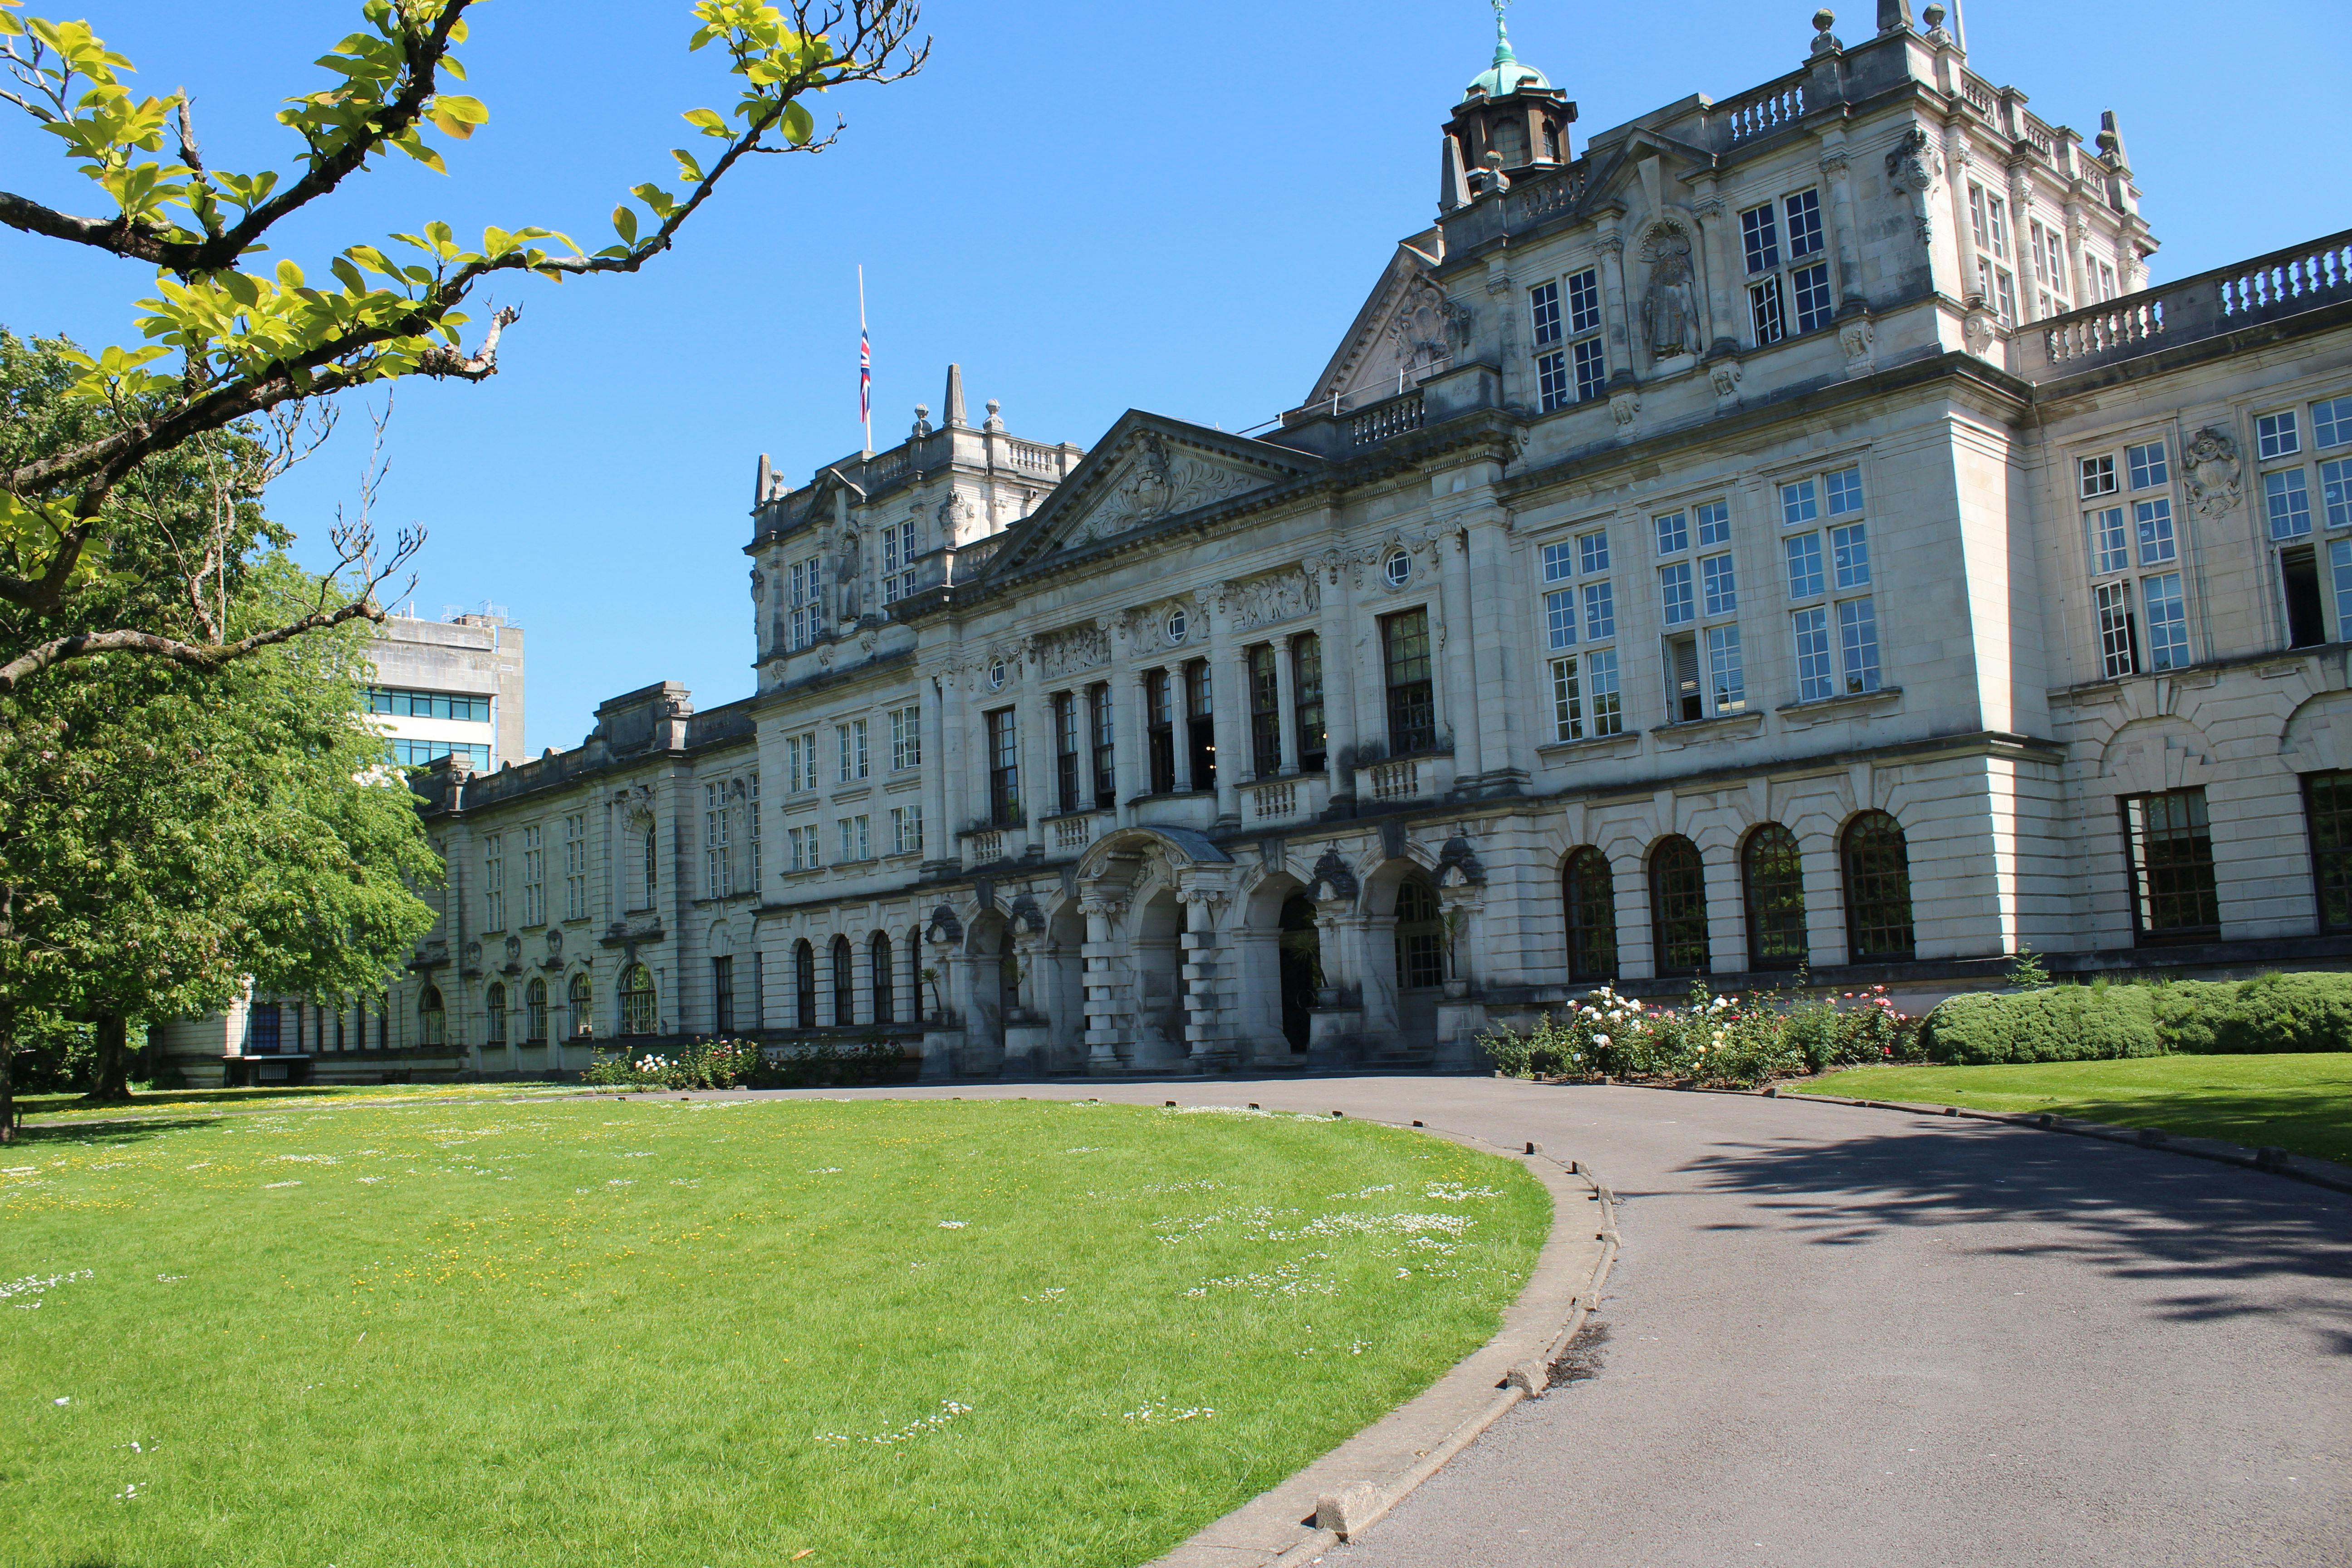 Private day tour of Cardiff with St Fagans Museum, Cardiff Castle and Cardiff Bay